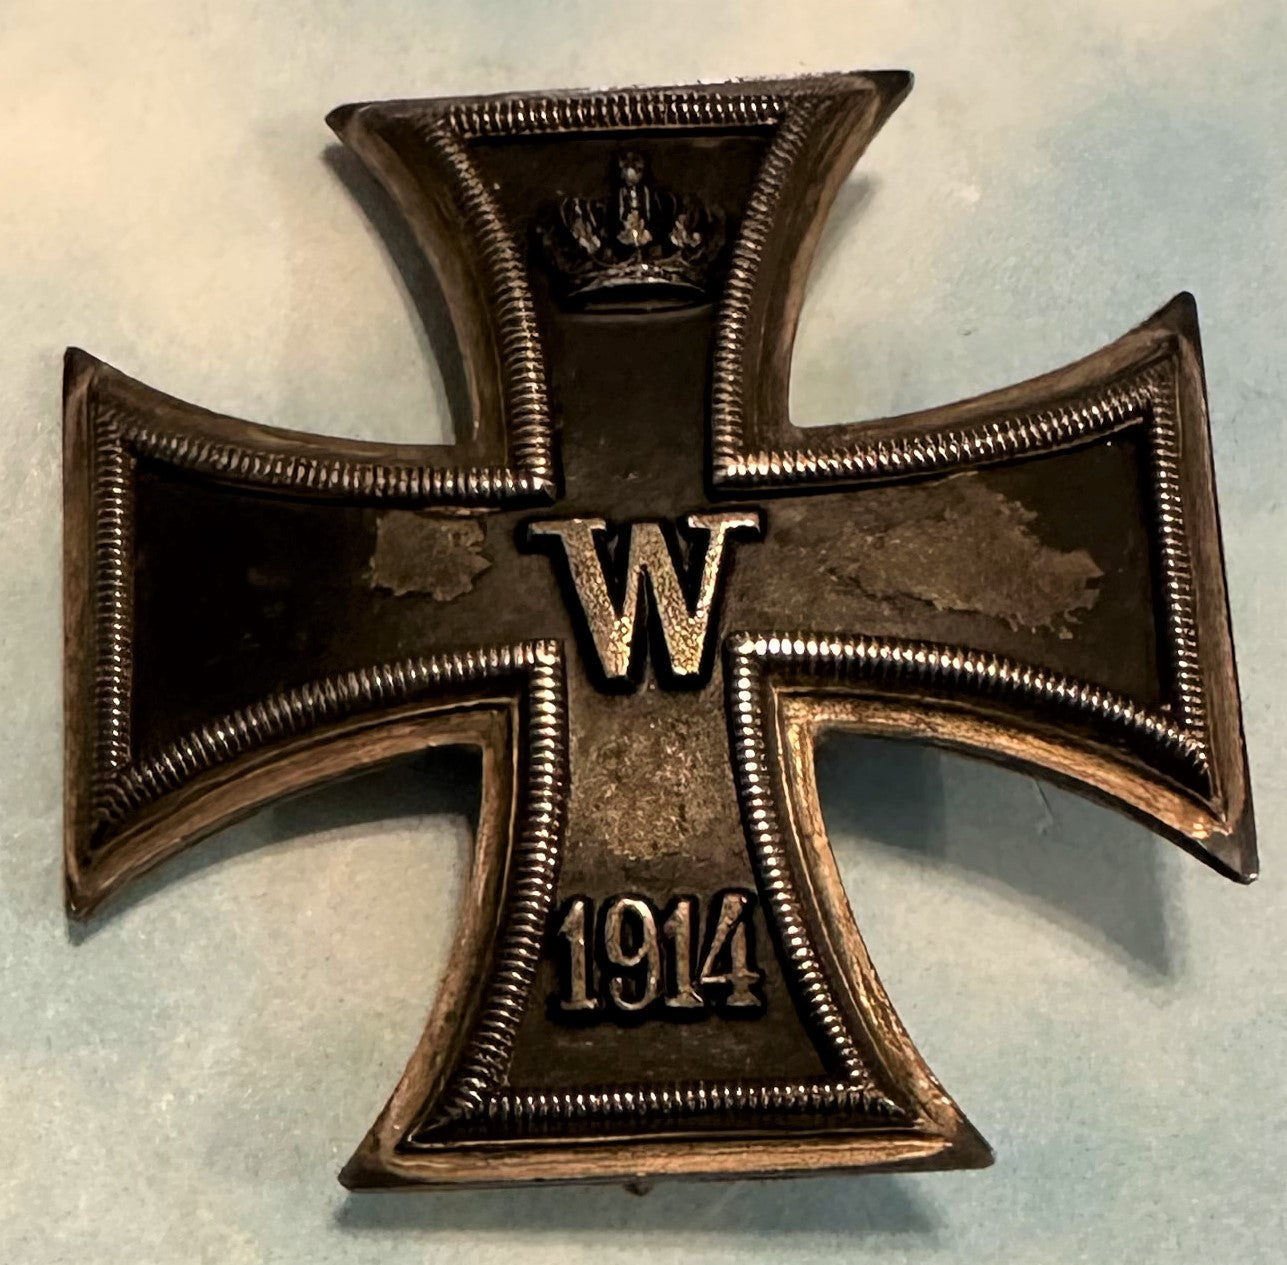 German 1914 Iron Cross 1st Class – Low Vaulted – .850 Silver – in the Original Presentation Case - Derrittmeister Militaria Group